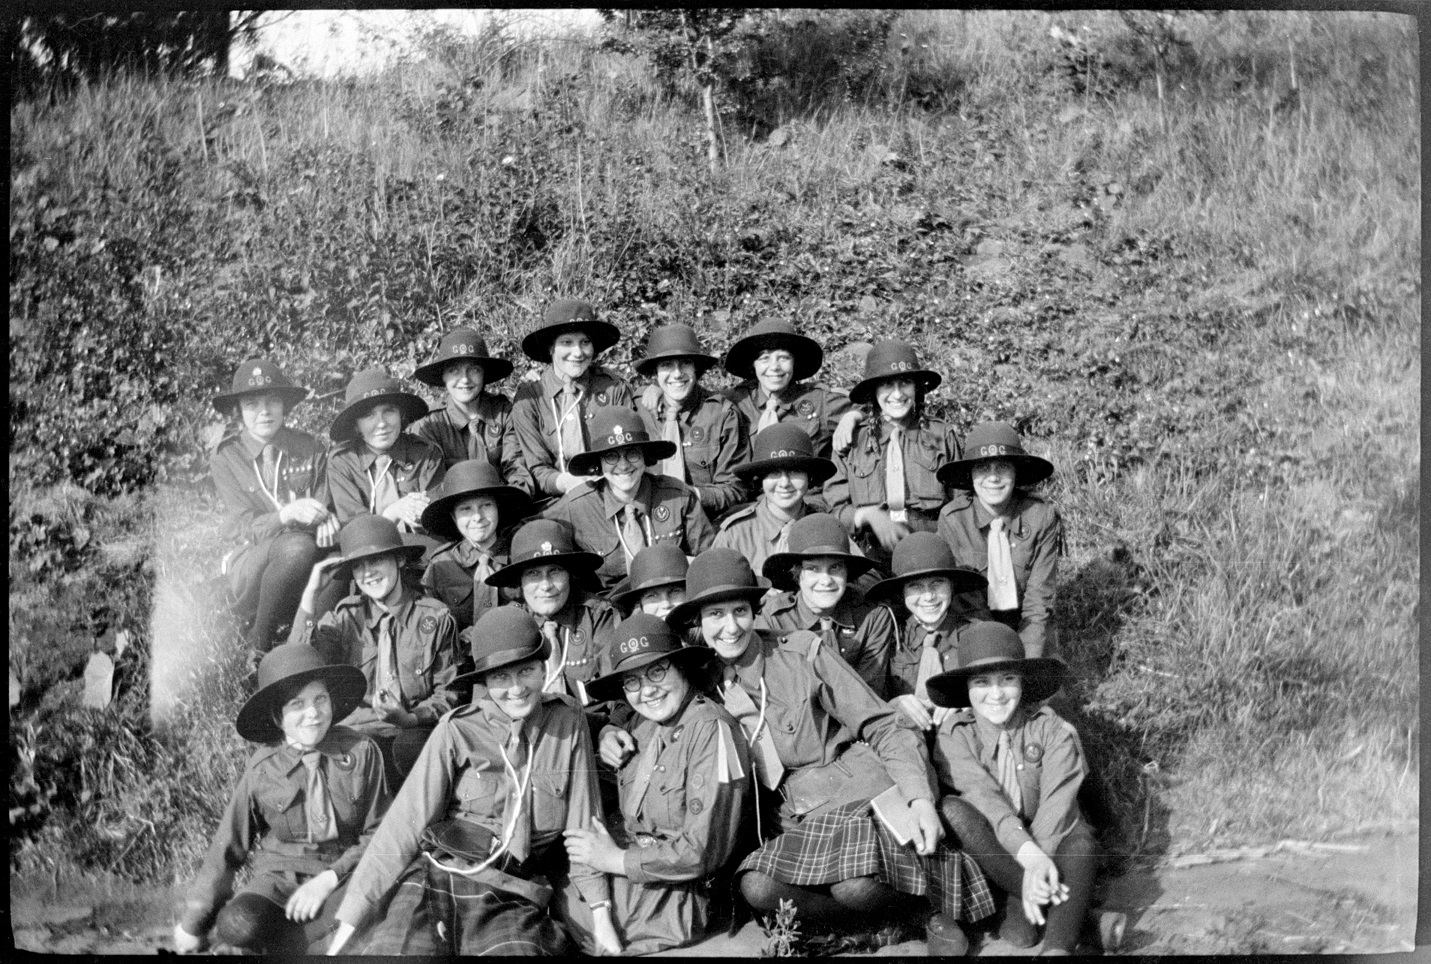 A black and white archive photo of a Girlguiding group wearing helmets and uniforms posing for a photograph sitting in greenery. 